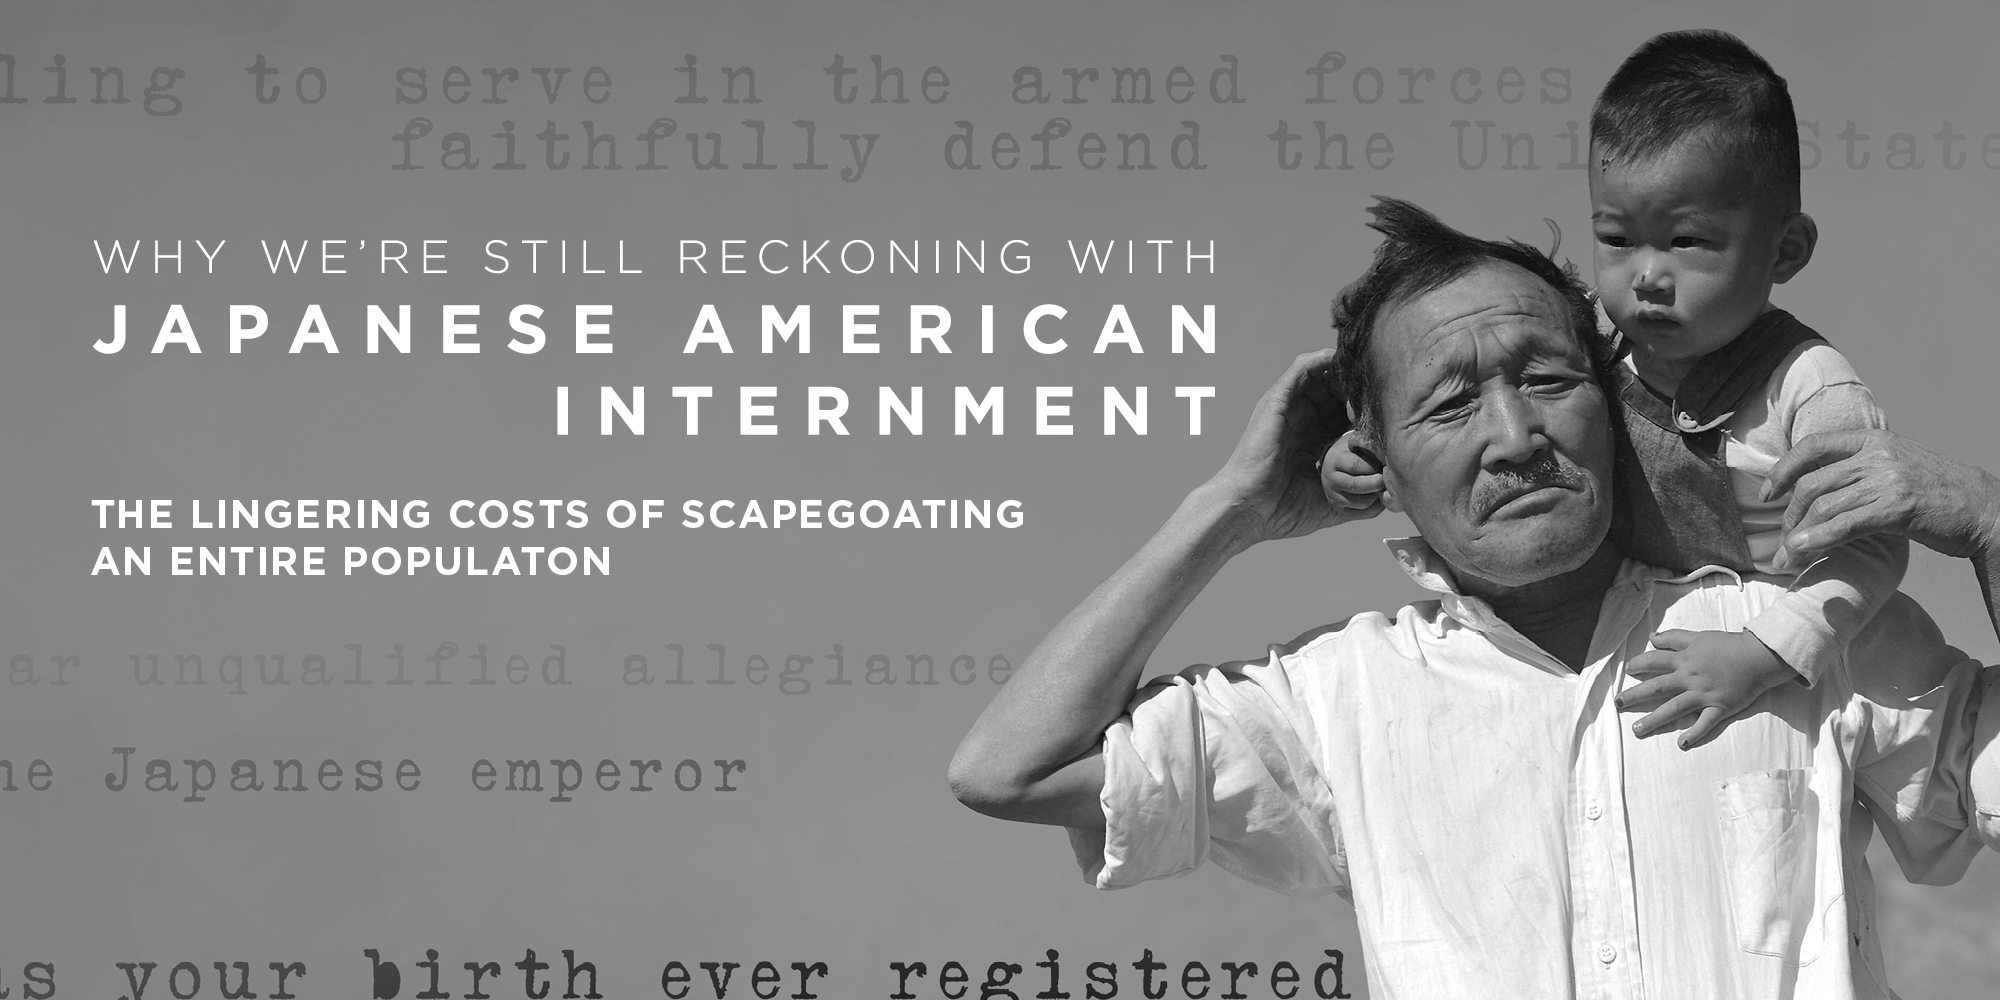 Why We’re Still Reckoning With Japanese American Internment